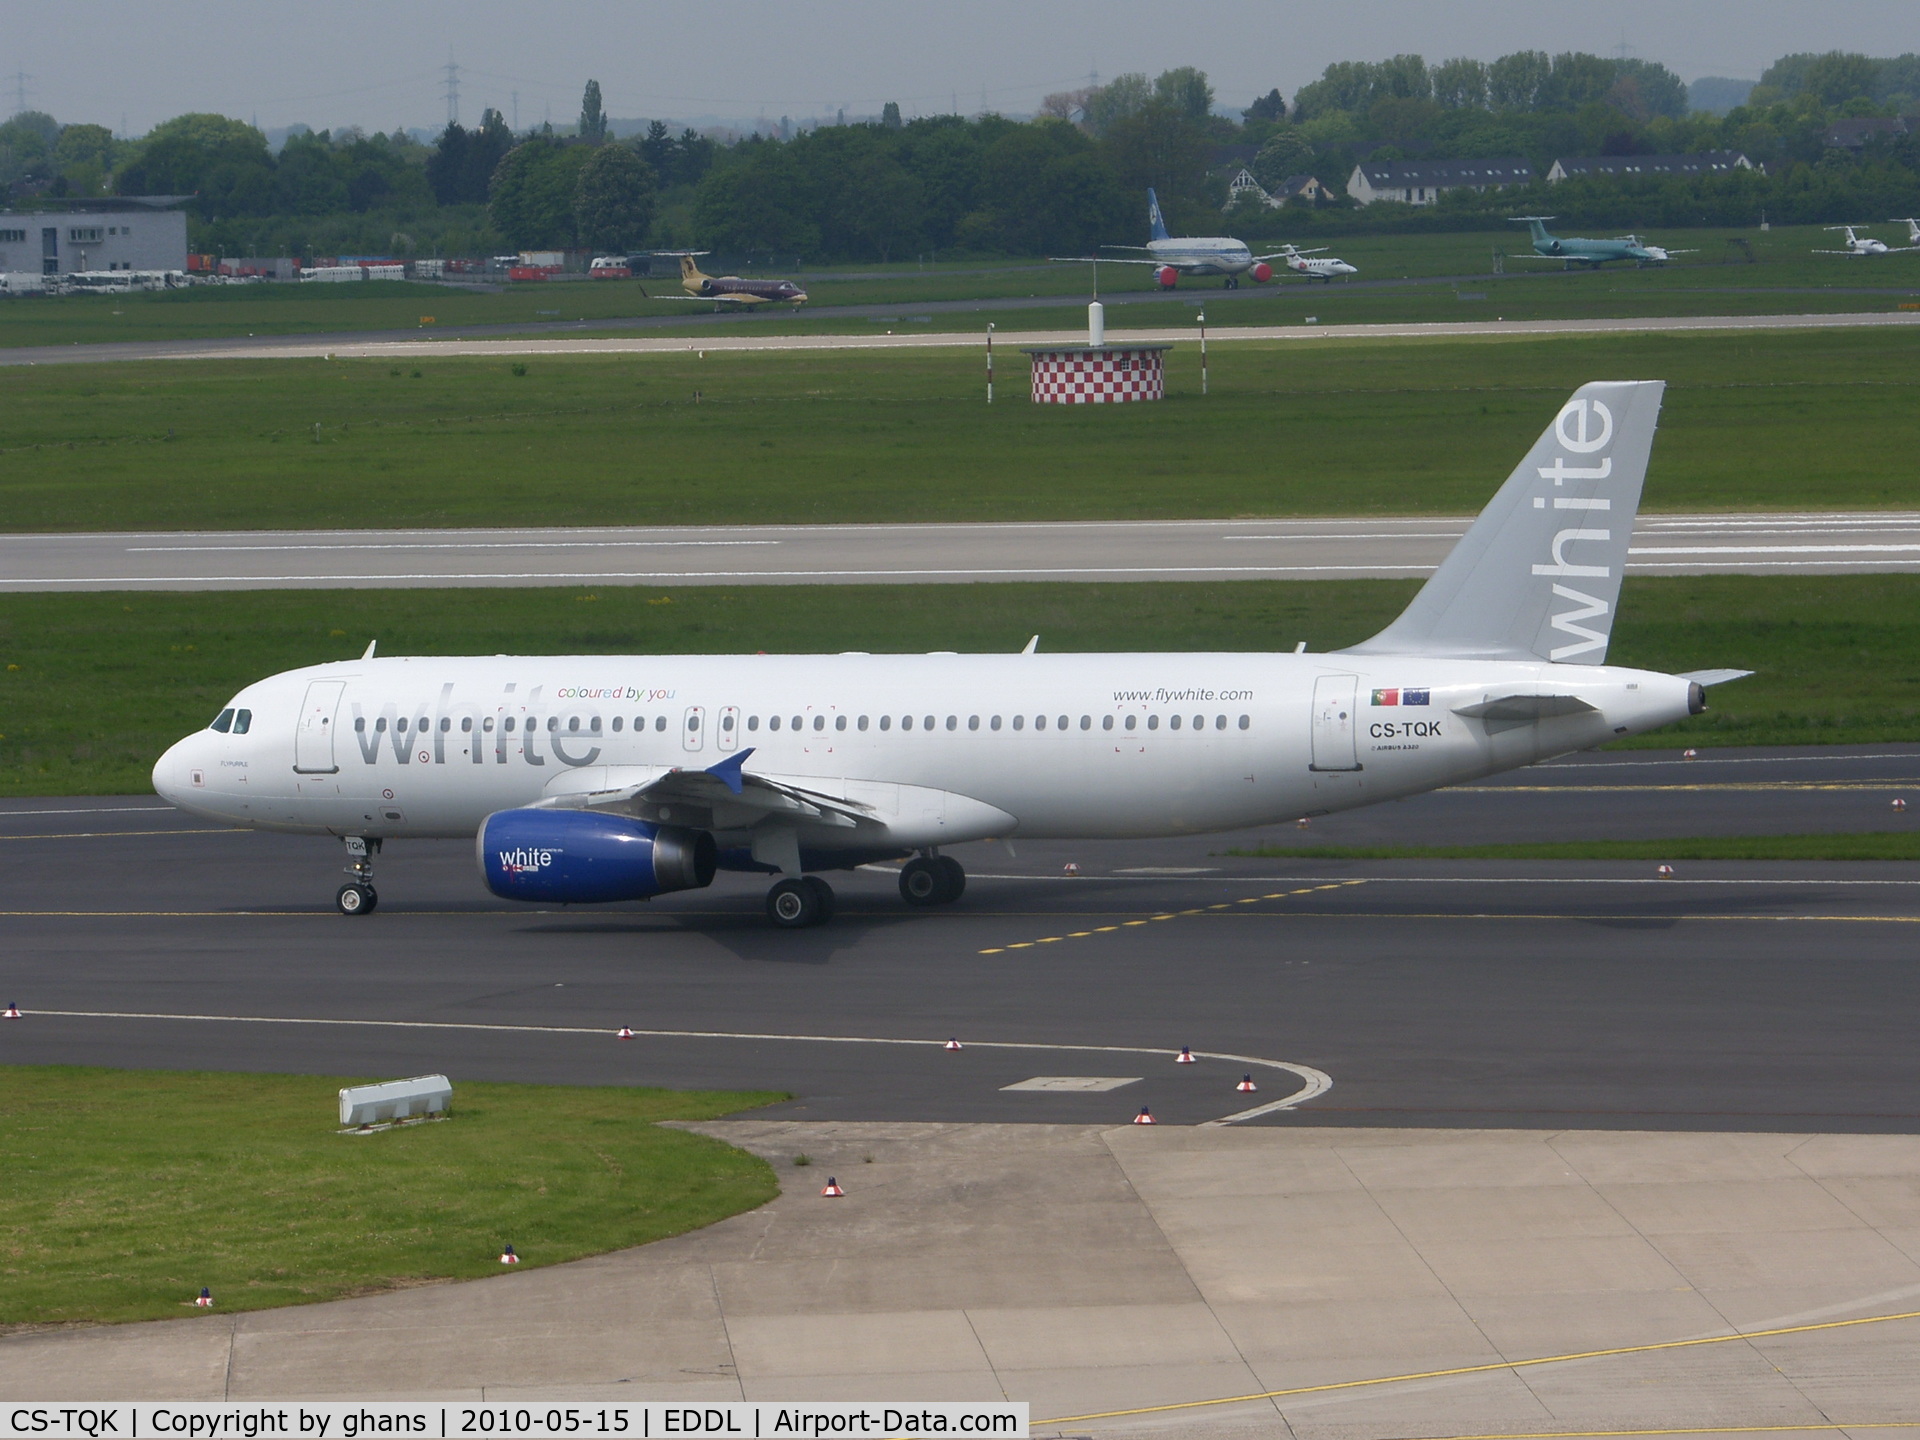 CS-TQK, 2004 Airbus A320-232 C/N 2204, This aircarft is not all what it says...